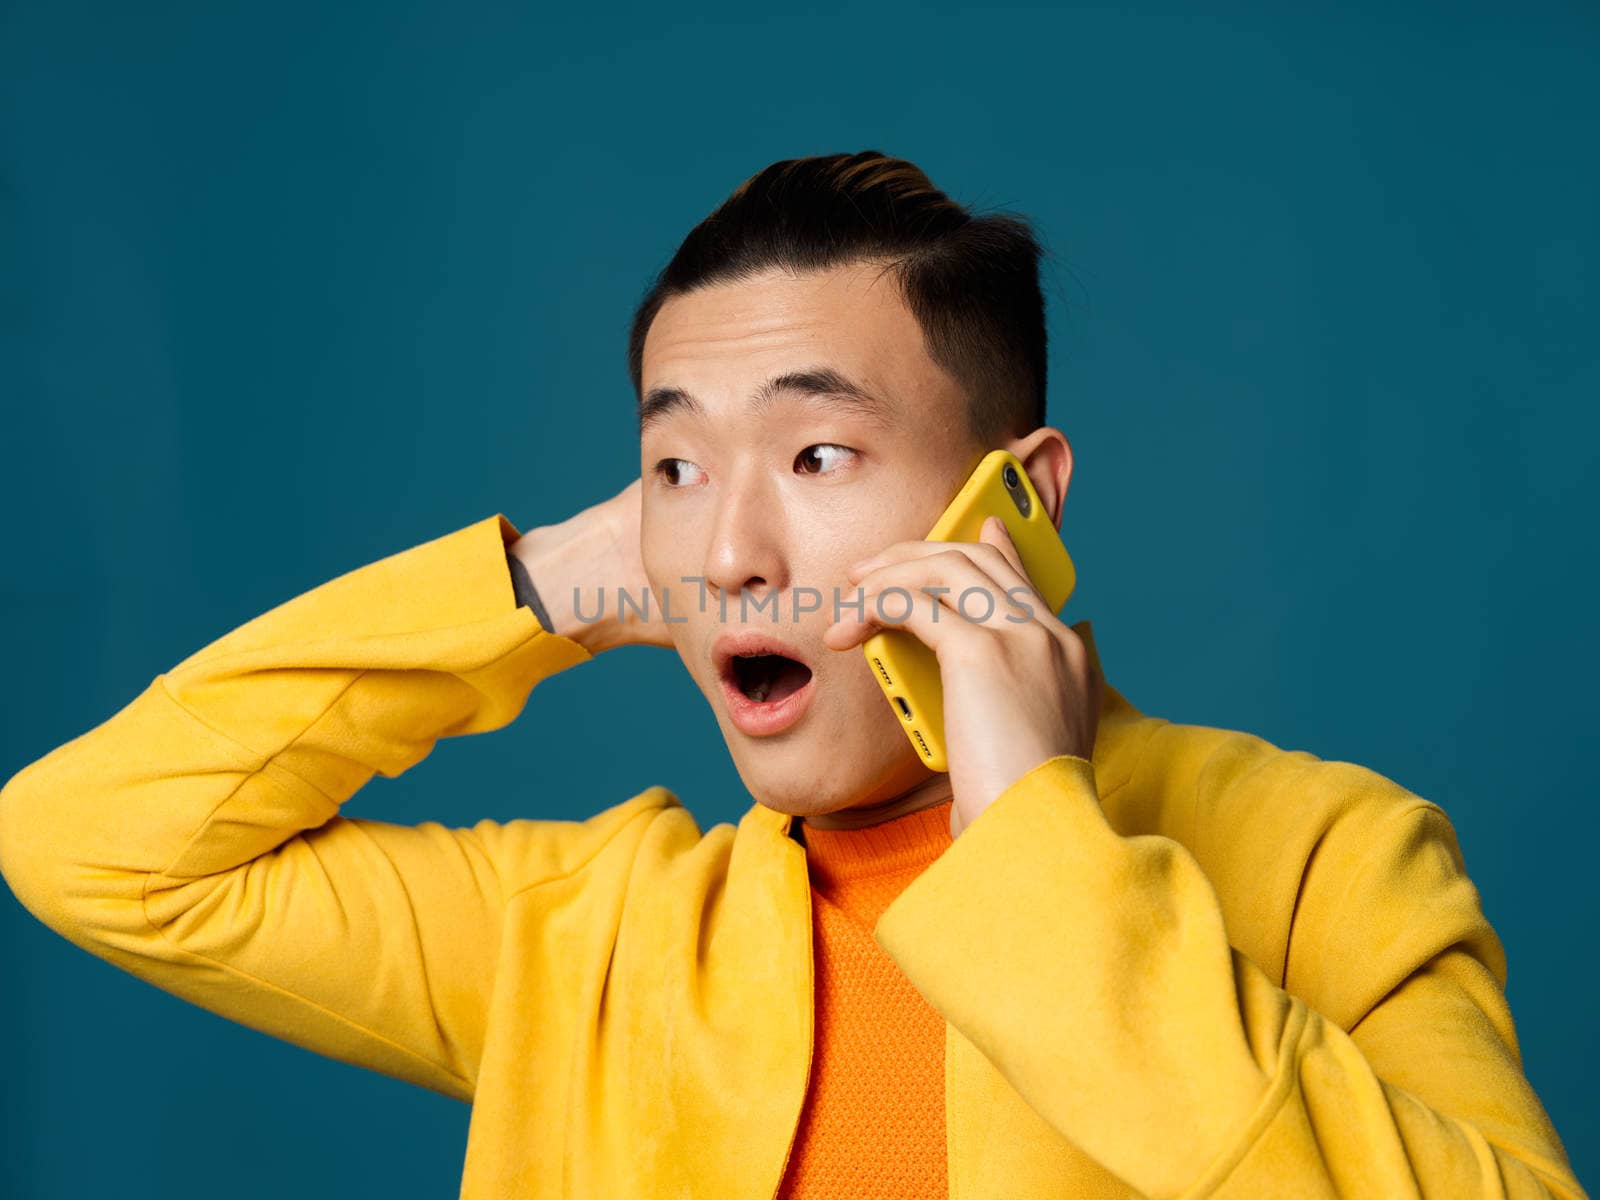 Man with open mouth on blue background talking on the phone cropped view of hand behind head. High quality photo